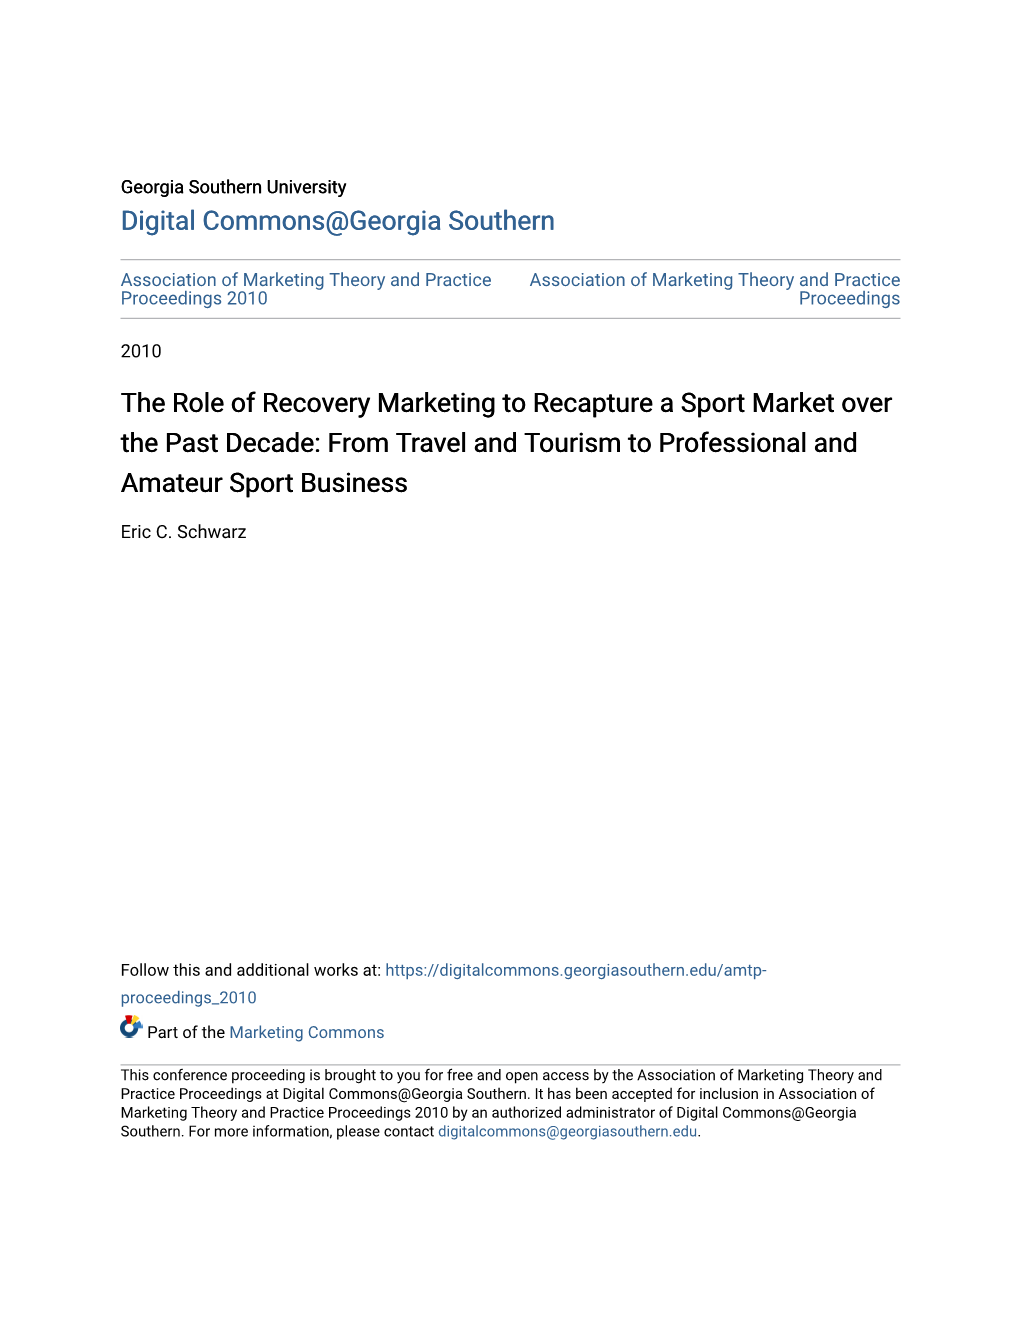 The Role of Recovery Marketing to Recapture a Sport Market Over the Past Decade: from Travel and Tourism to Professional and Amateur Sport Business